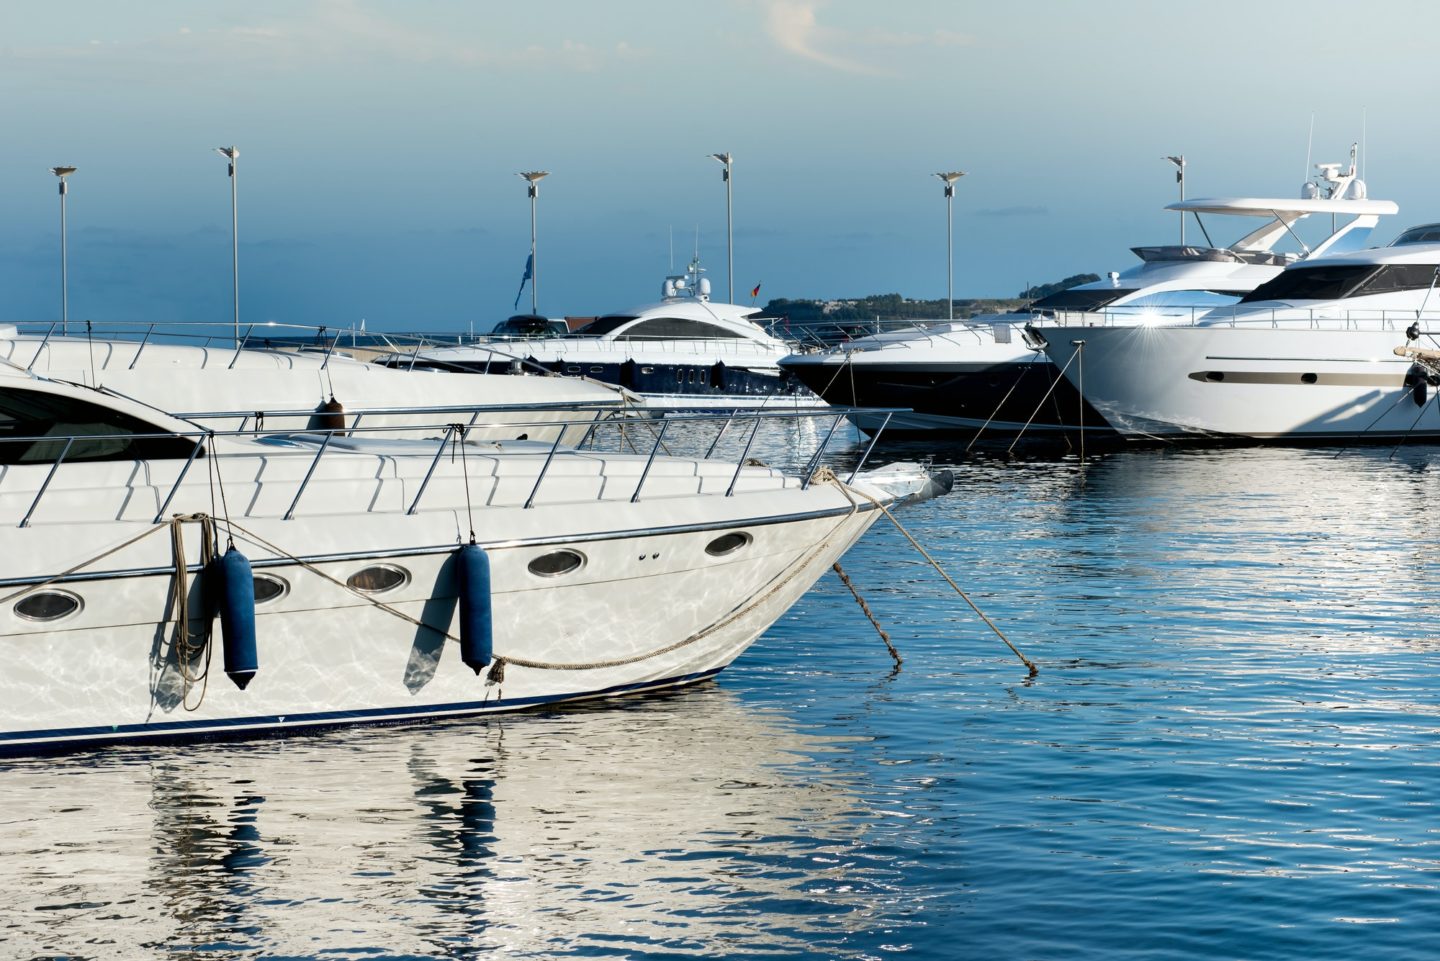 Luxury motorboats or yachts moored in a marina